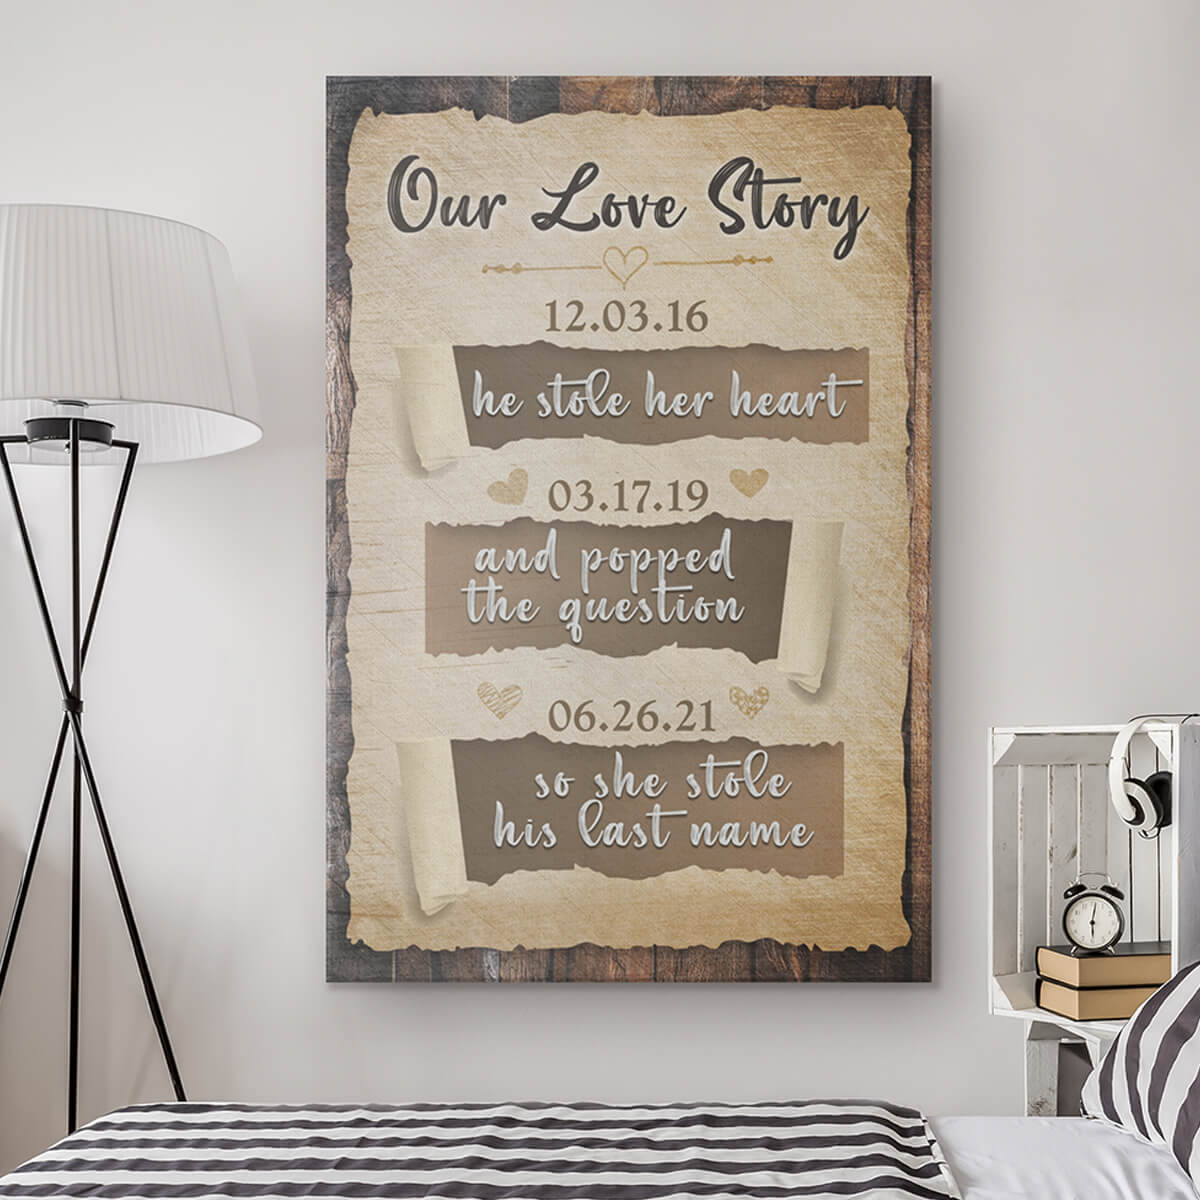 Personalized "Our Love Story" Canvas Wall Art